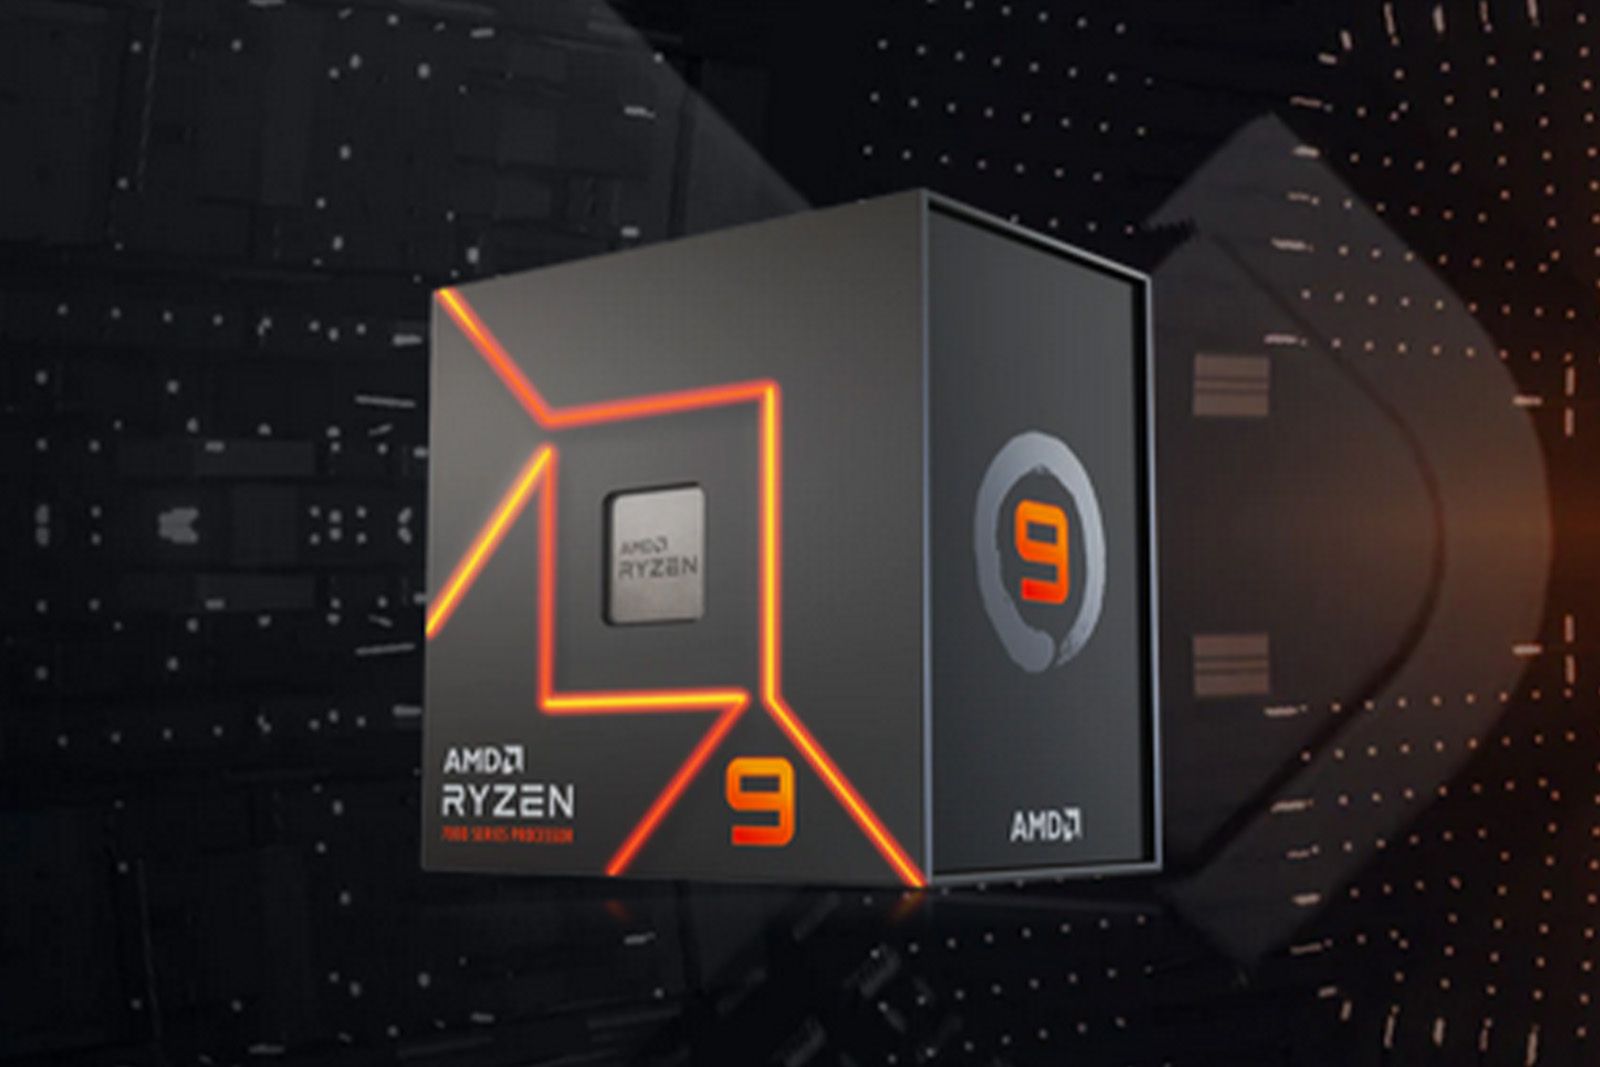 Last-min deal: Save $167 on AMD’s top-end Ryzen CPU during Prime Day only